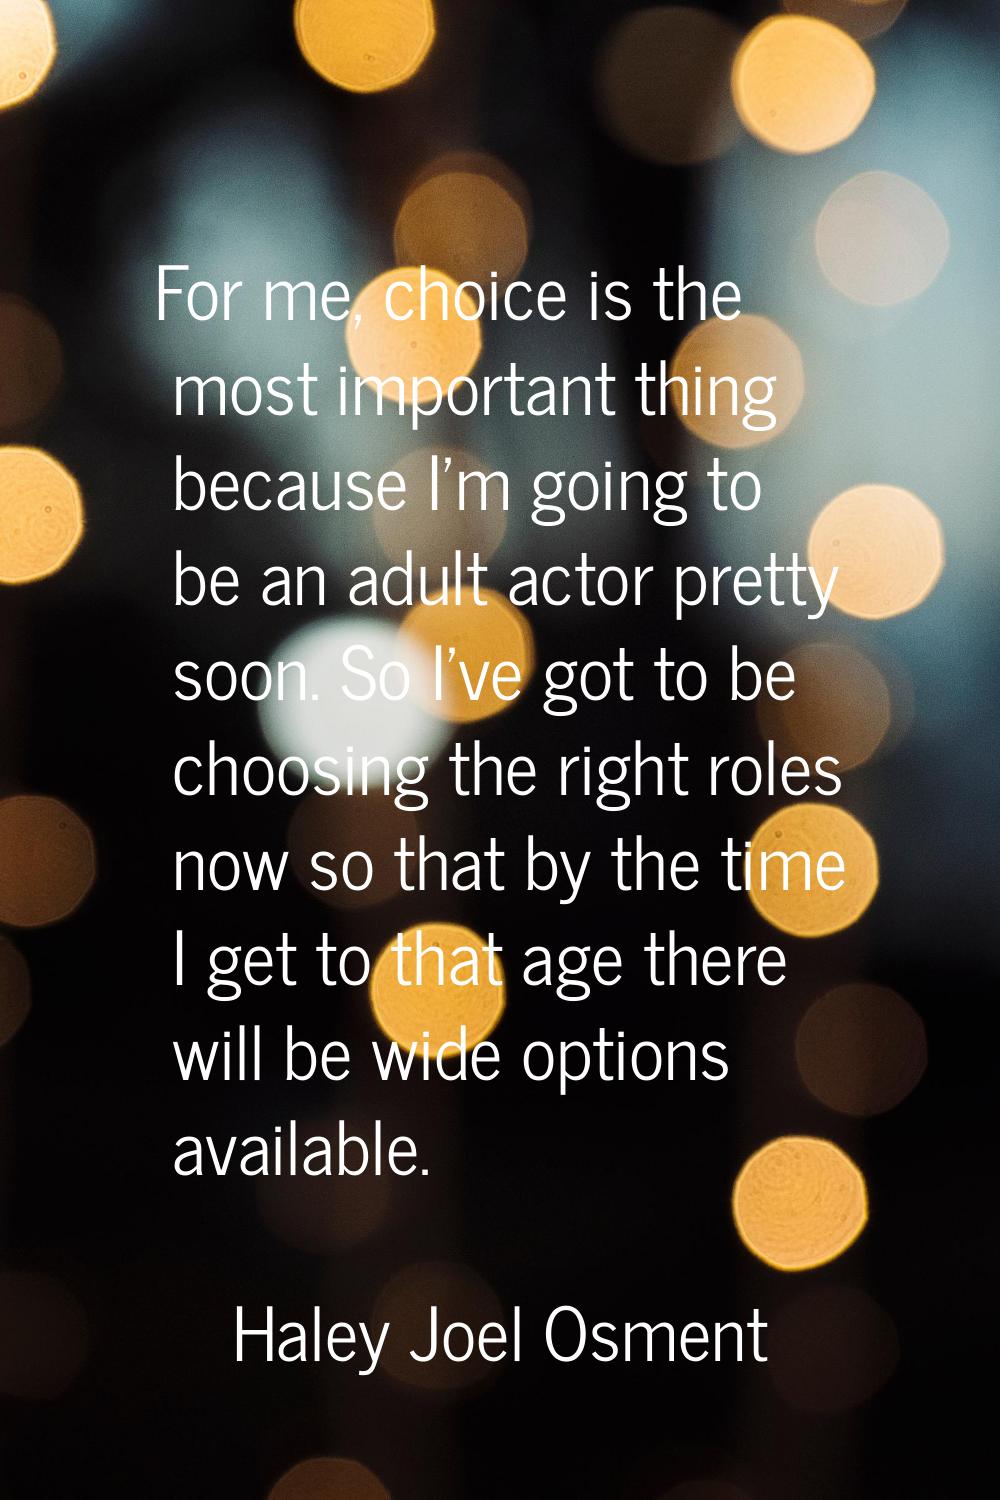 For me, choice is the most important thing because I'm going to be an adult actor pretty soon. So I